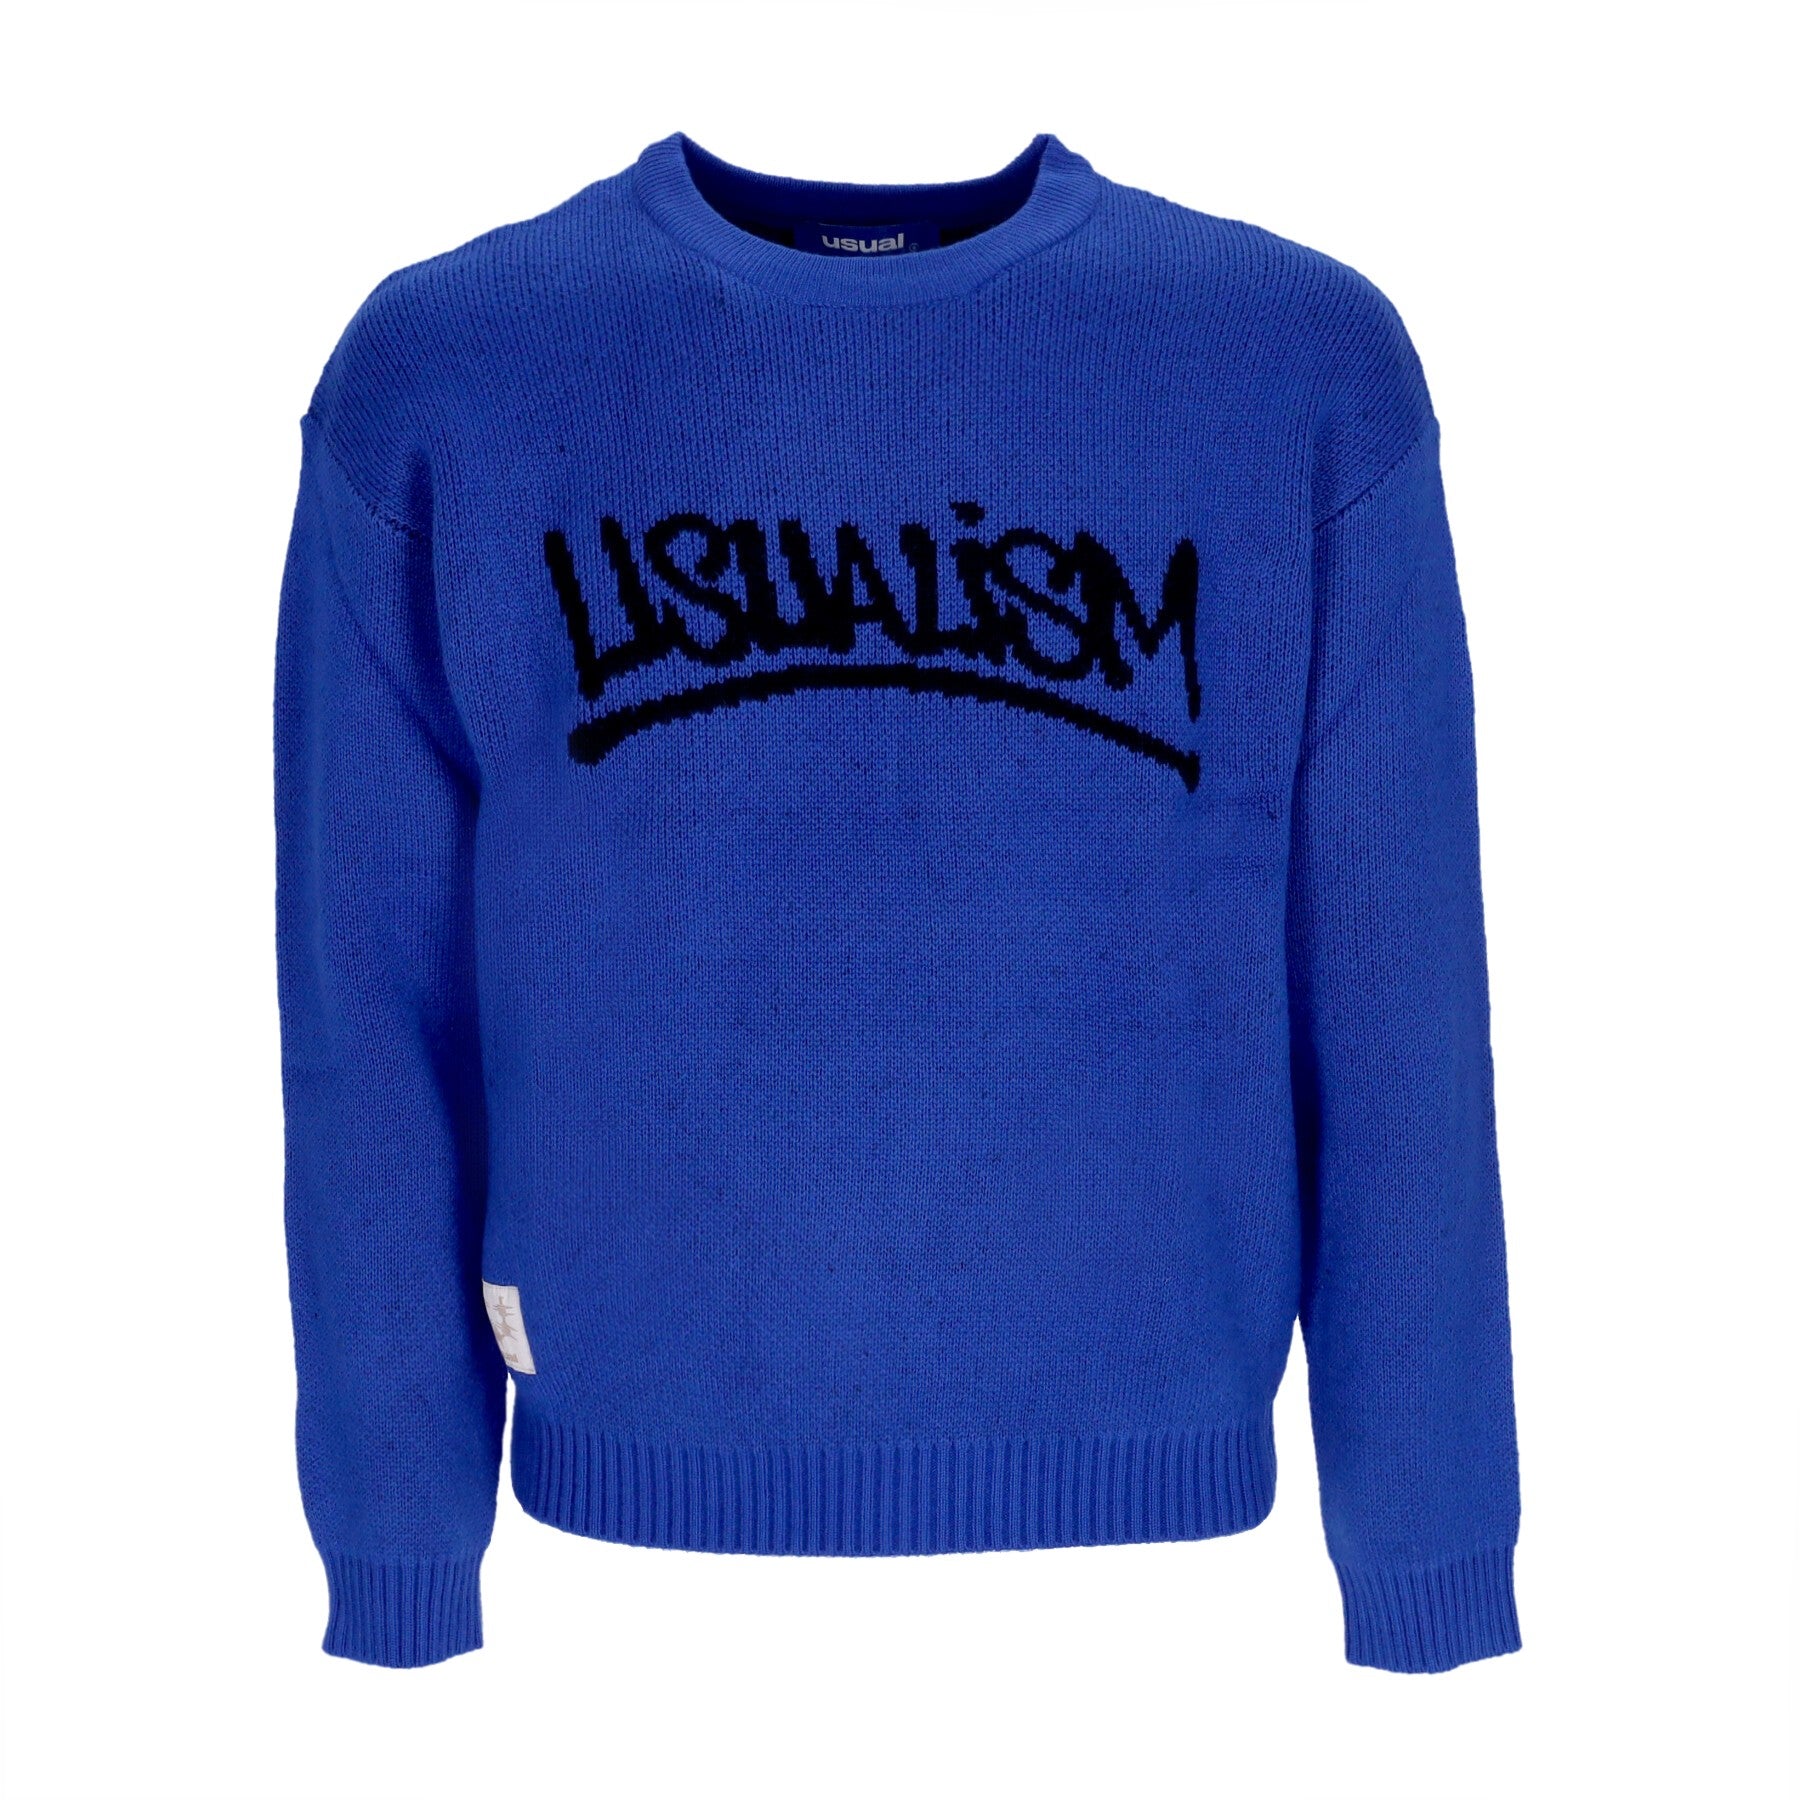 Usualism Sweater Men's Sweater